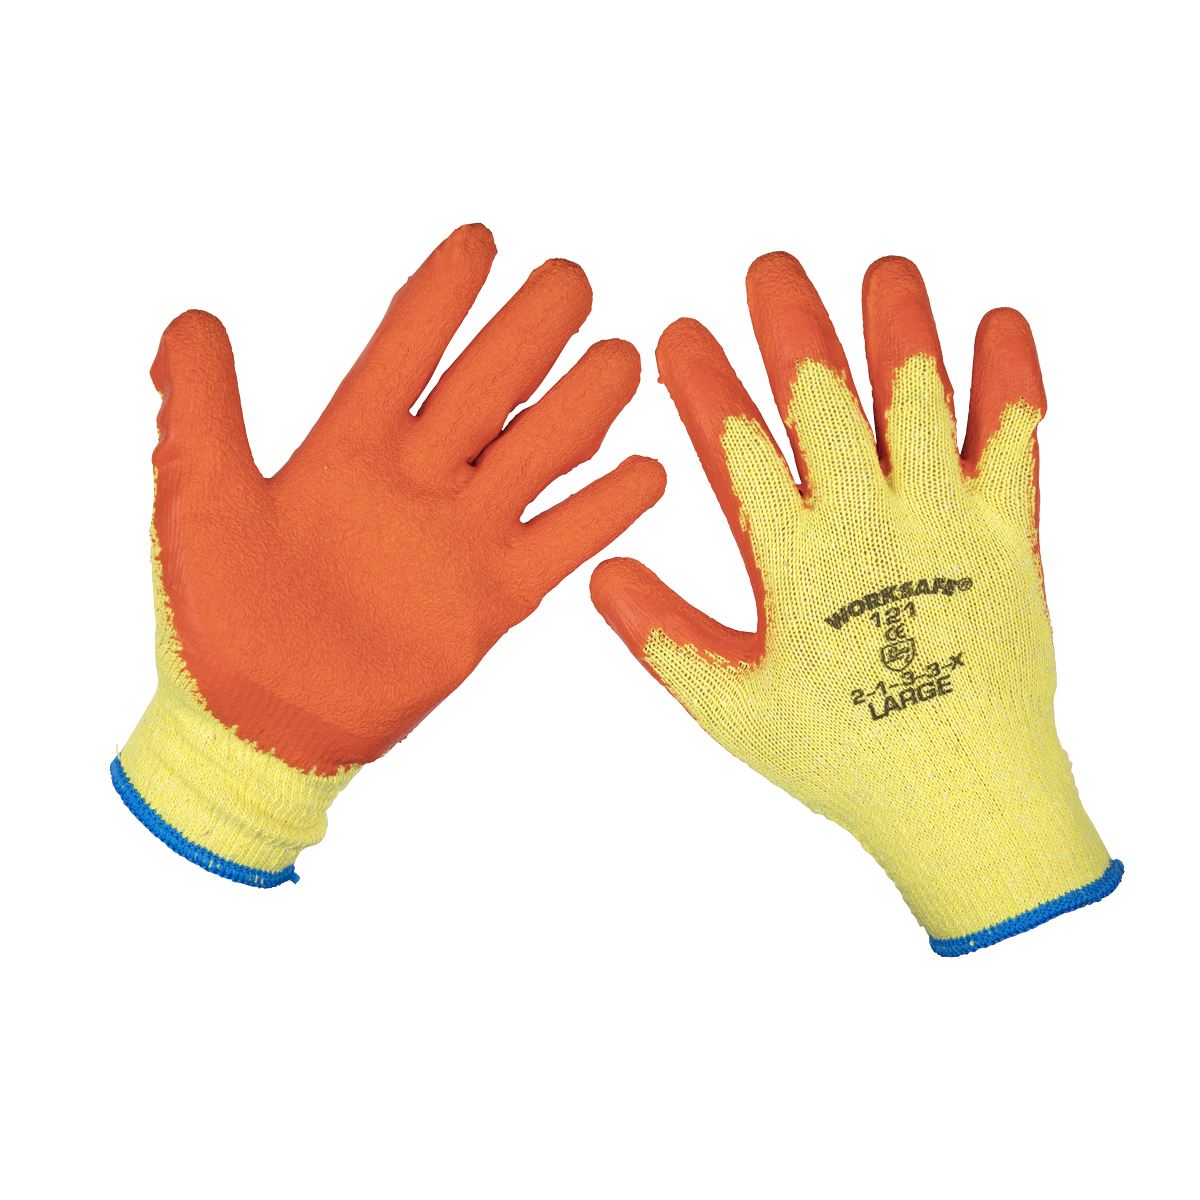 Worksafe by Sealey Super Grip Knitted Gloves Latex Palm (Large) - Pack of 12 Pairs